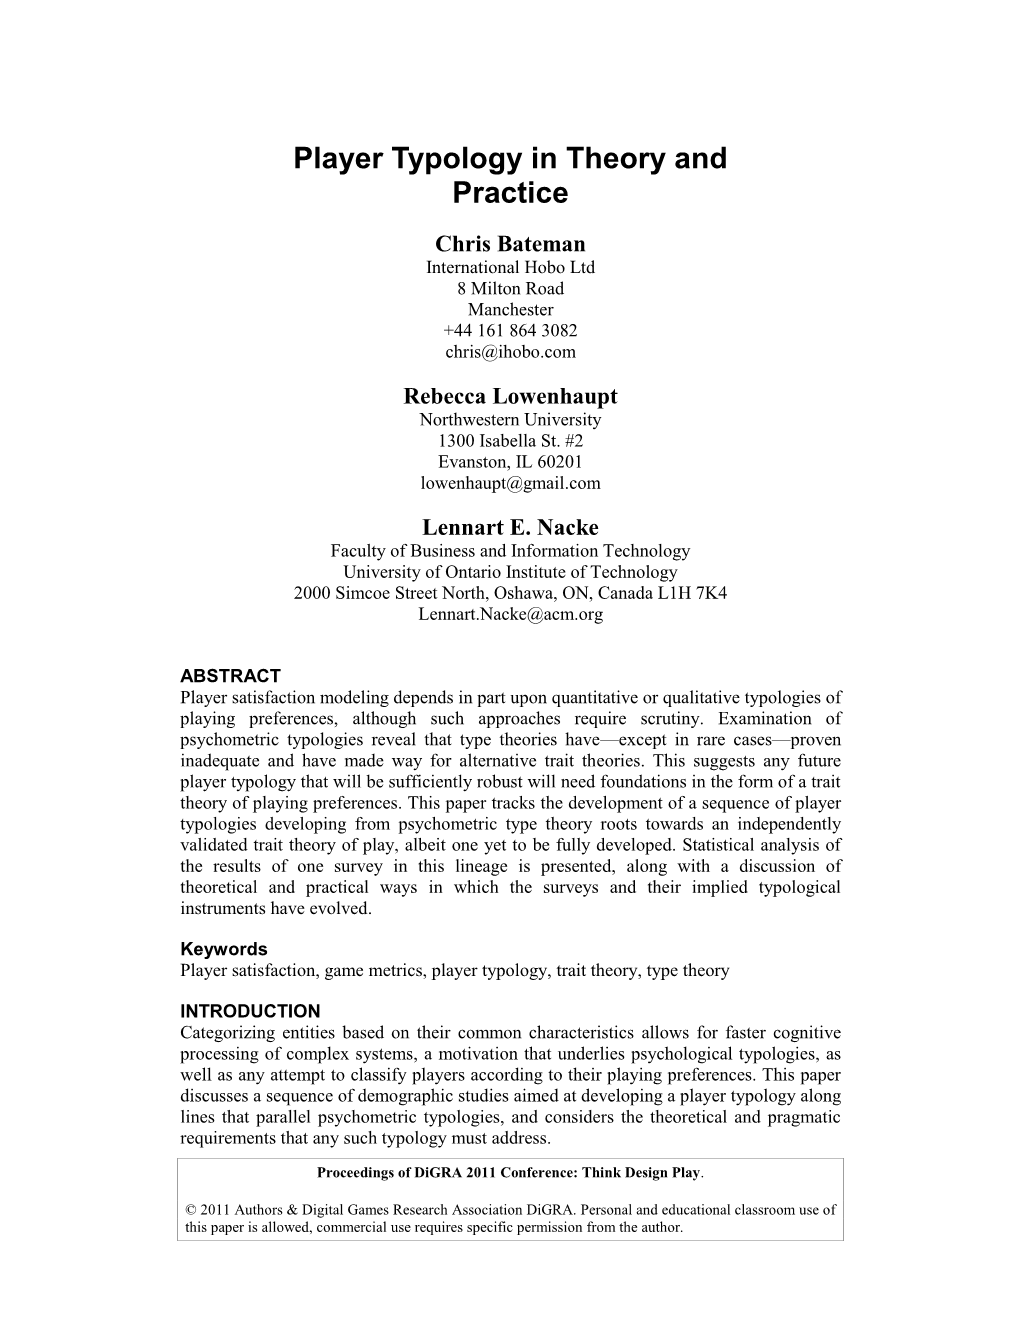 Player Typology in Theory and Practice